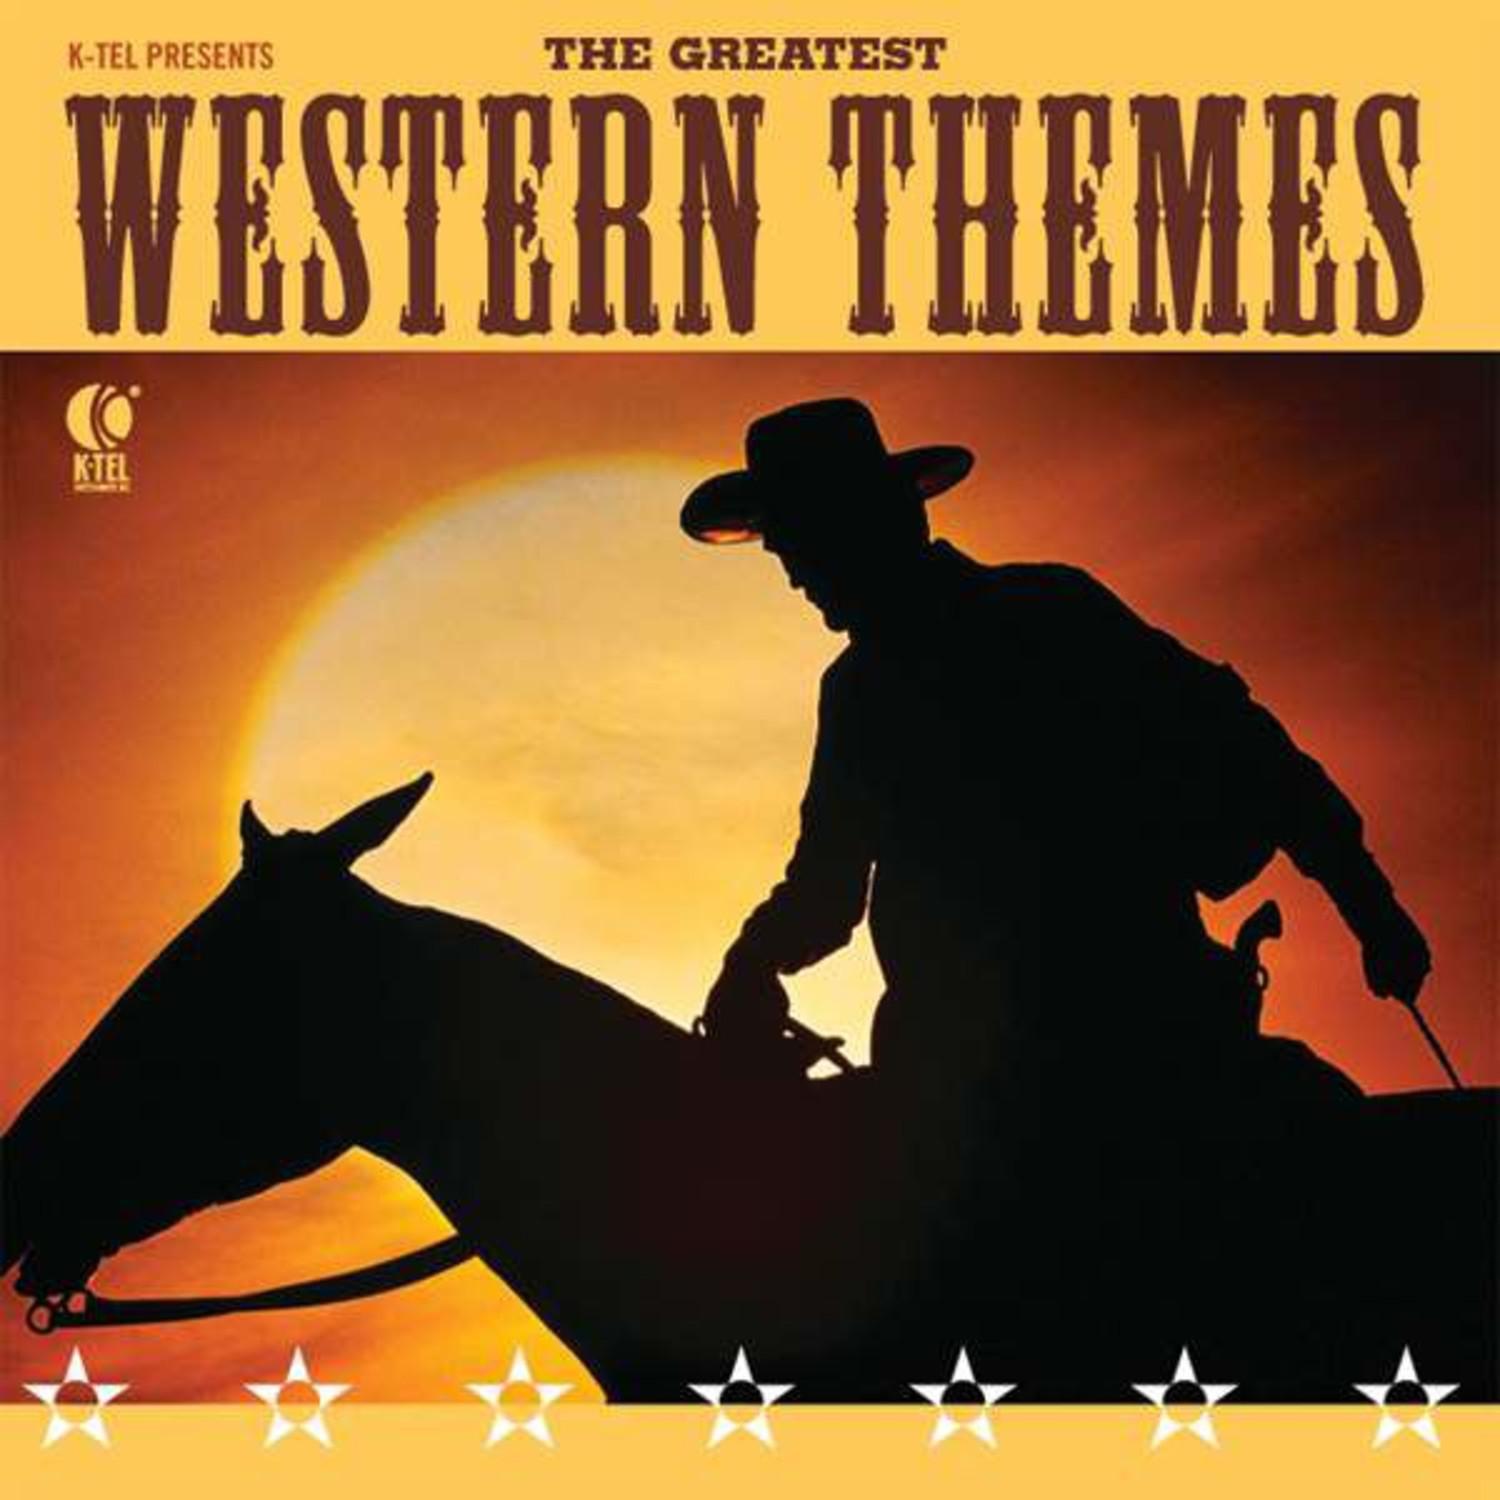 The Greatest Western Themes